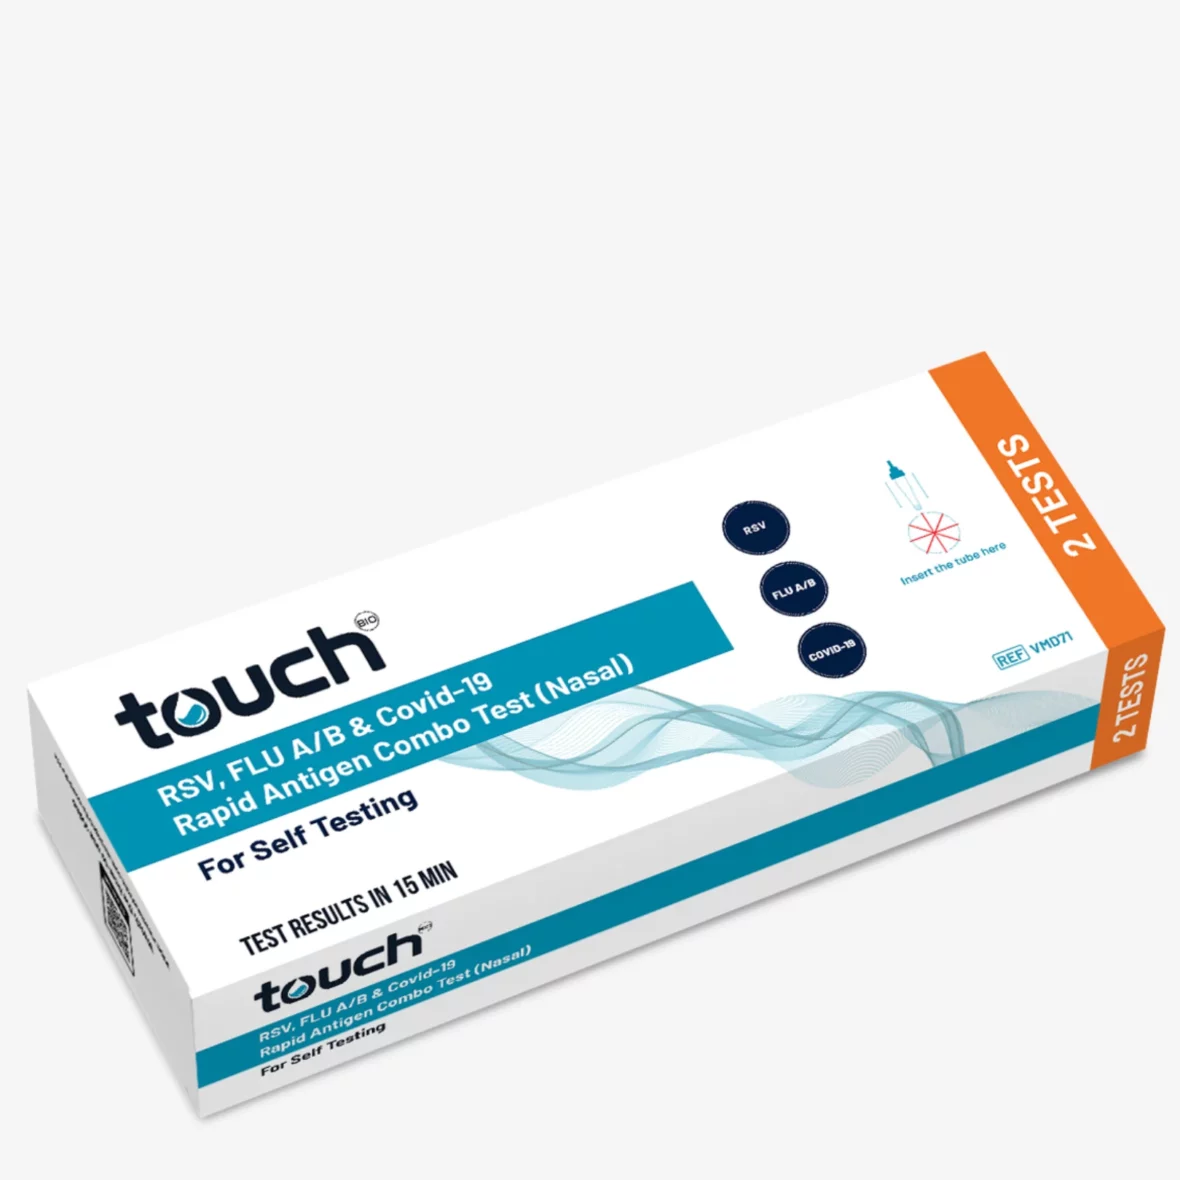 Touchbio 4 in 1 Self-testing Kit for RSV, Flu A/B, & COVID-19 | 2 Tests per pack